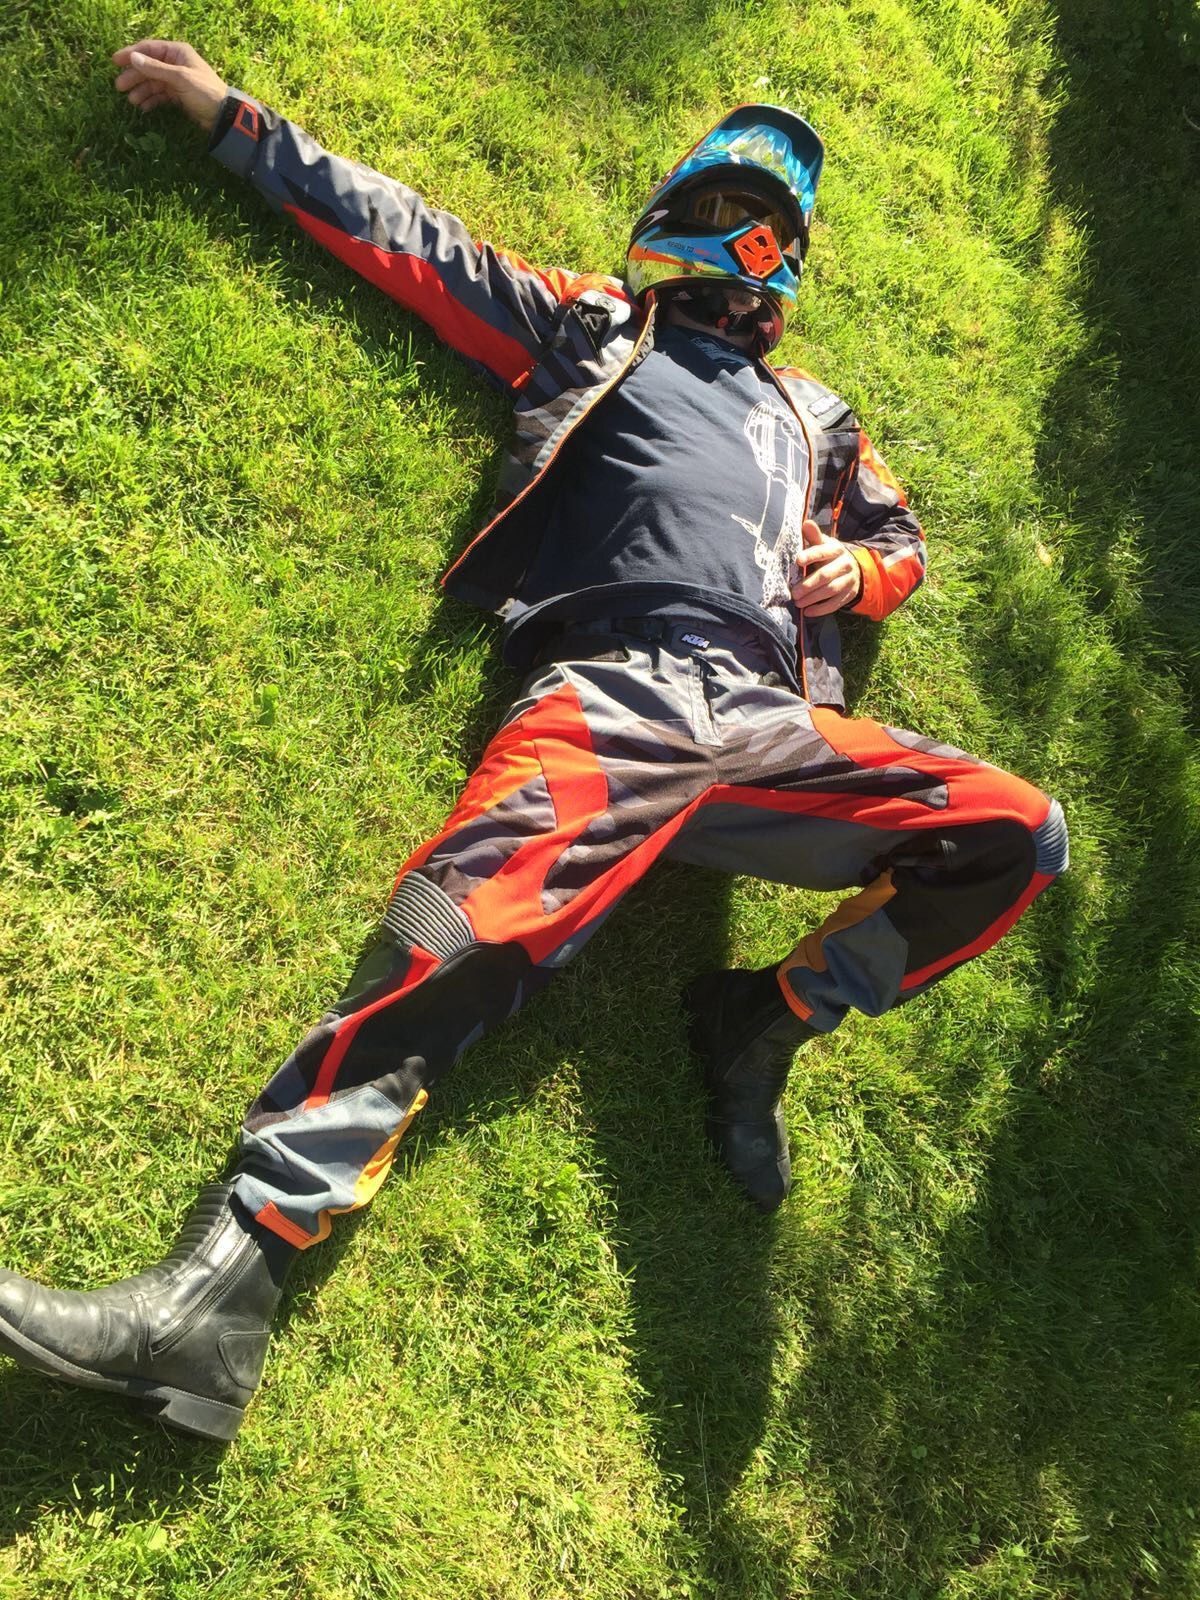 Had to take a rest from lookin' so great in the KTM Racetech Jacket and Pant with Moto-9 Bell helmet 